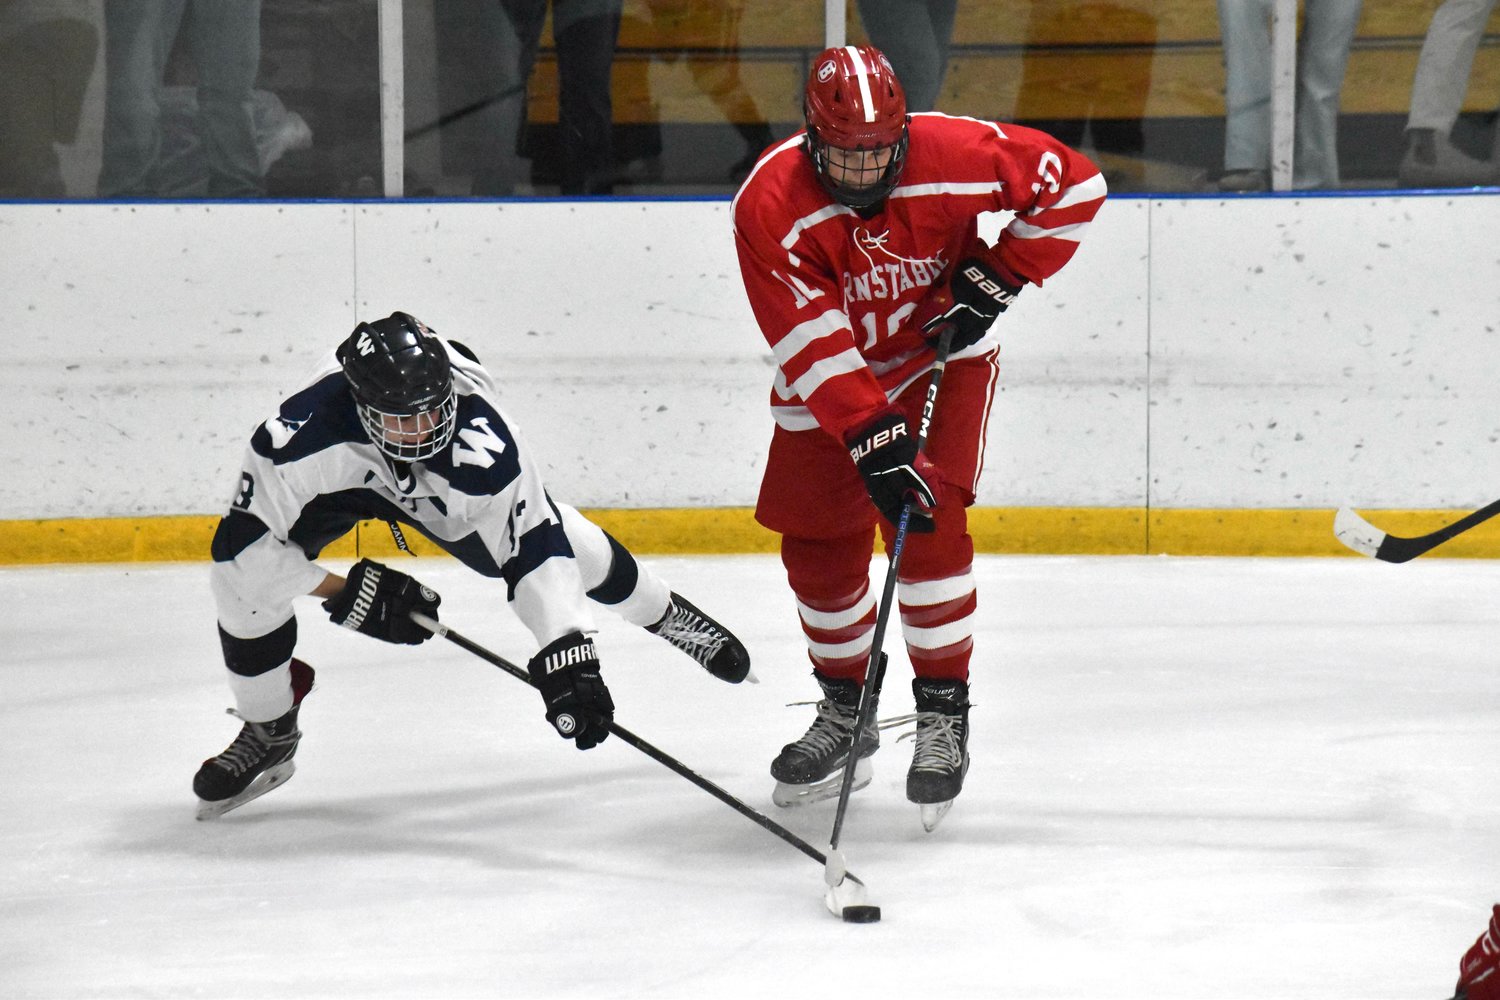 Jeremy Jenkinson pokes the puck away from a Barnstable player during Saturday’s 3-2 win.